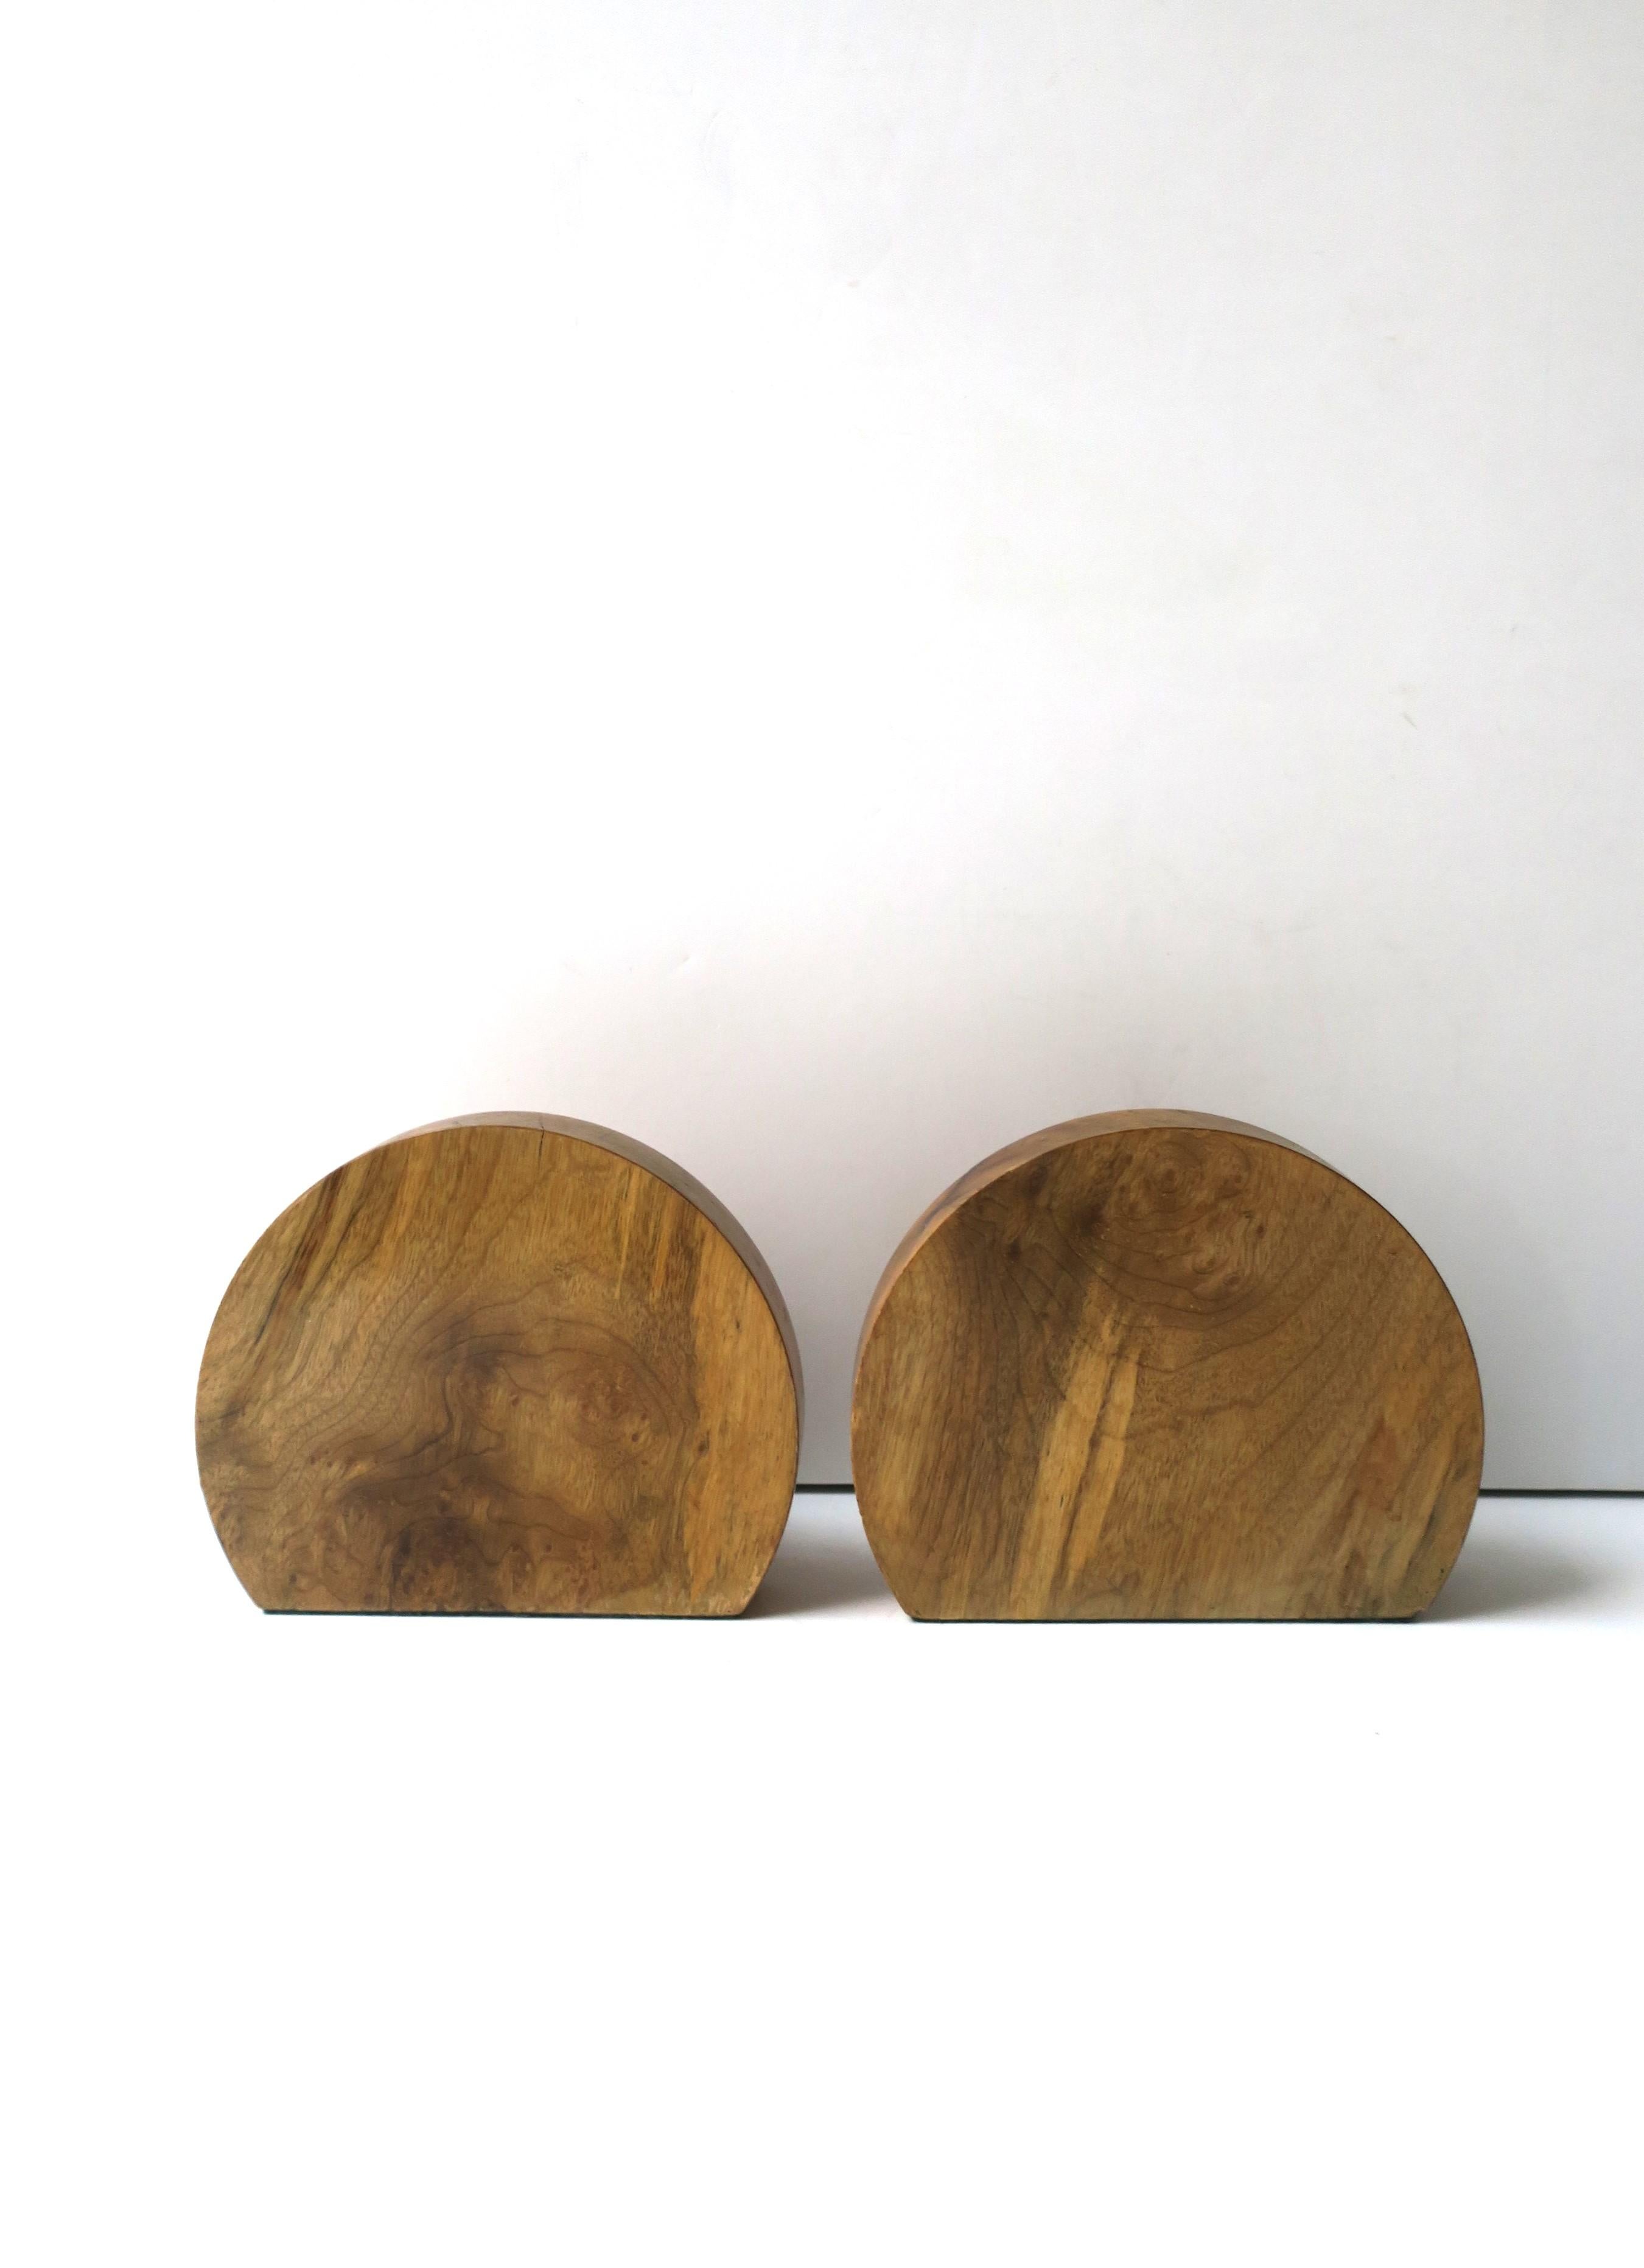 Art Deco Birdseye Maple Wood Bookends, Pair For Sale 4